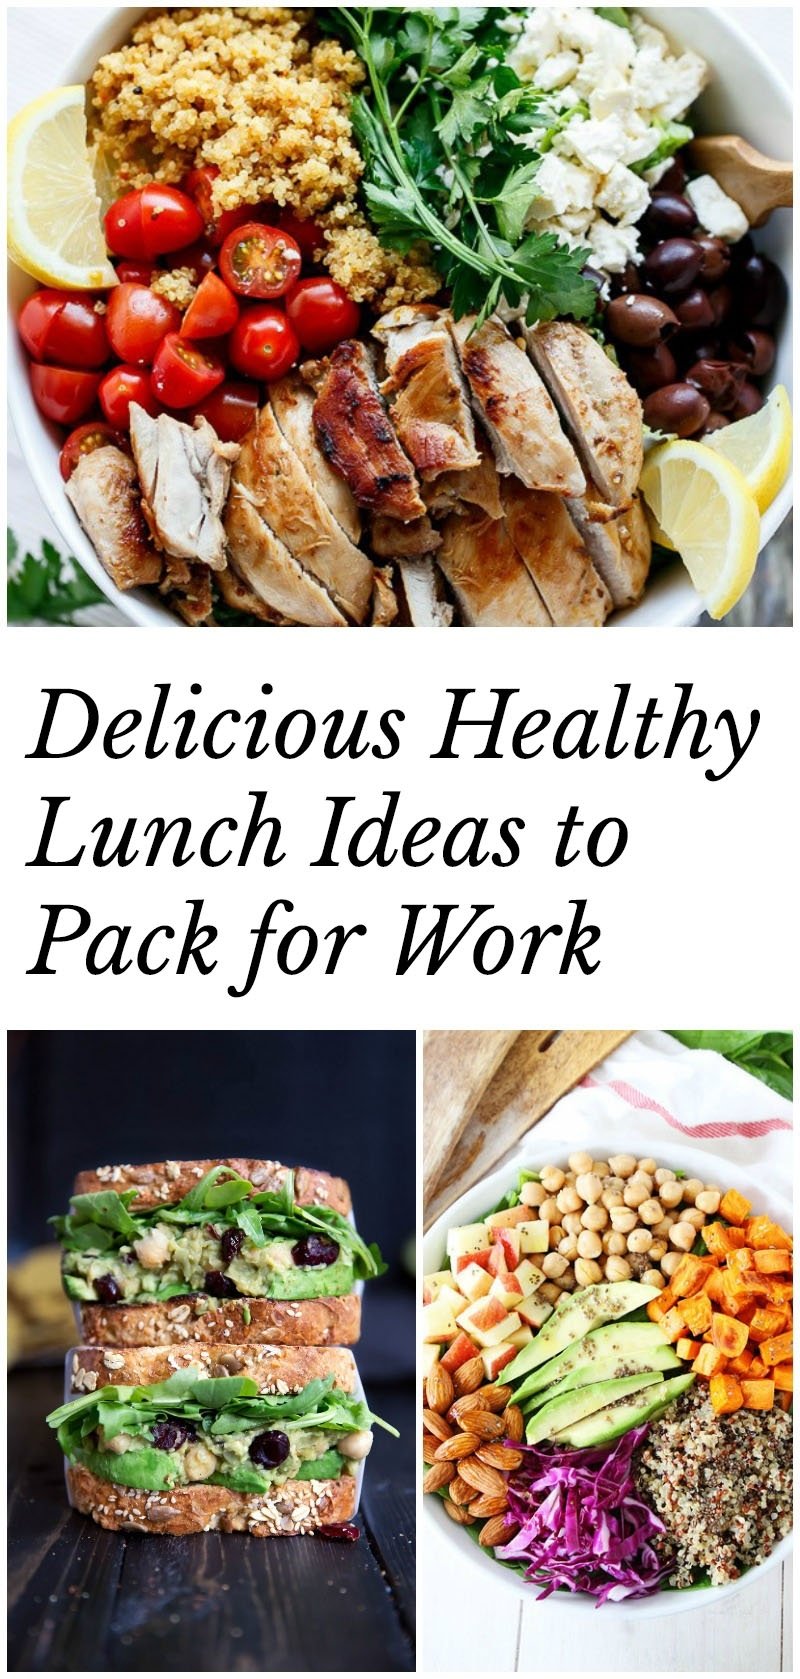 10 Famous Great Lunch Ideas For Work healthy lunch ideas to pack for work 40 recipes 6 2022